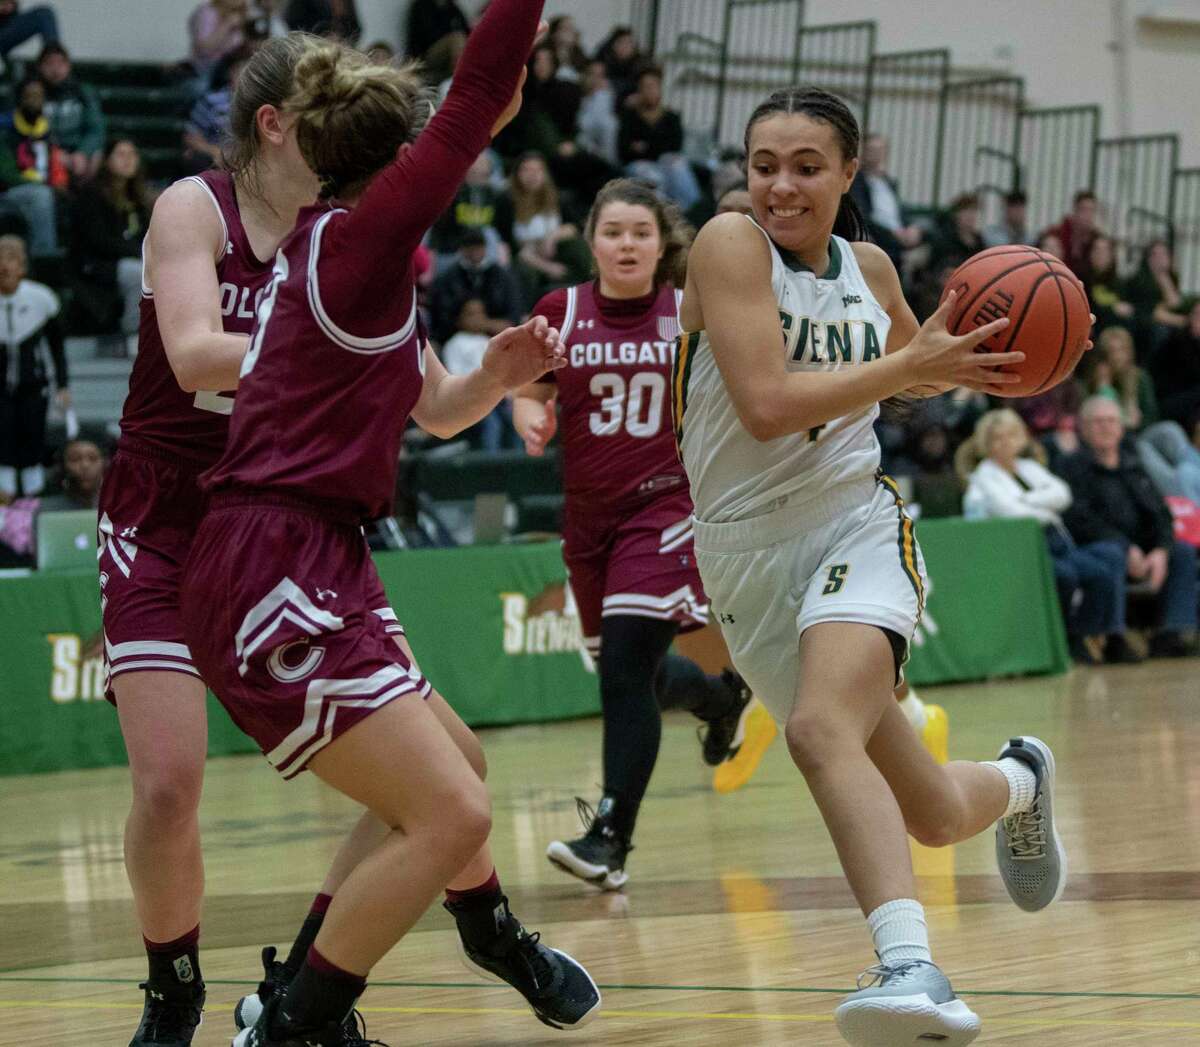 Siena’s Valencia Fontenelle-Posson drives to the hoop during a basketball game against Colgate at Siena College on Thursday, Dec. 2, 2021 in Loudonville, N.Y.